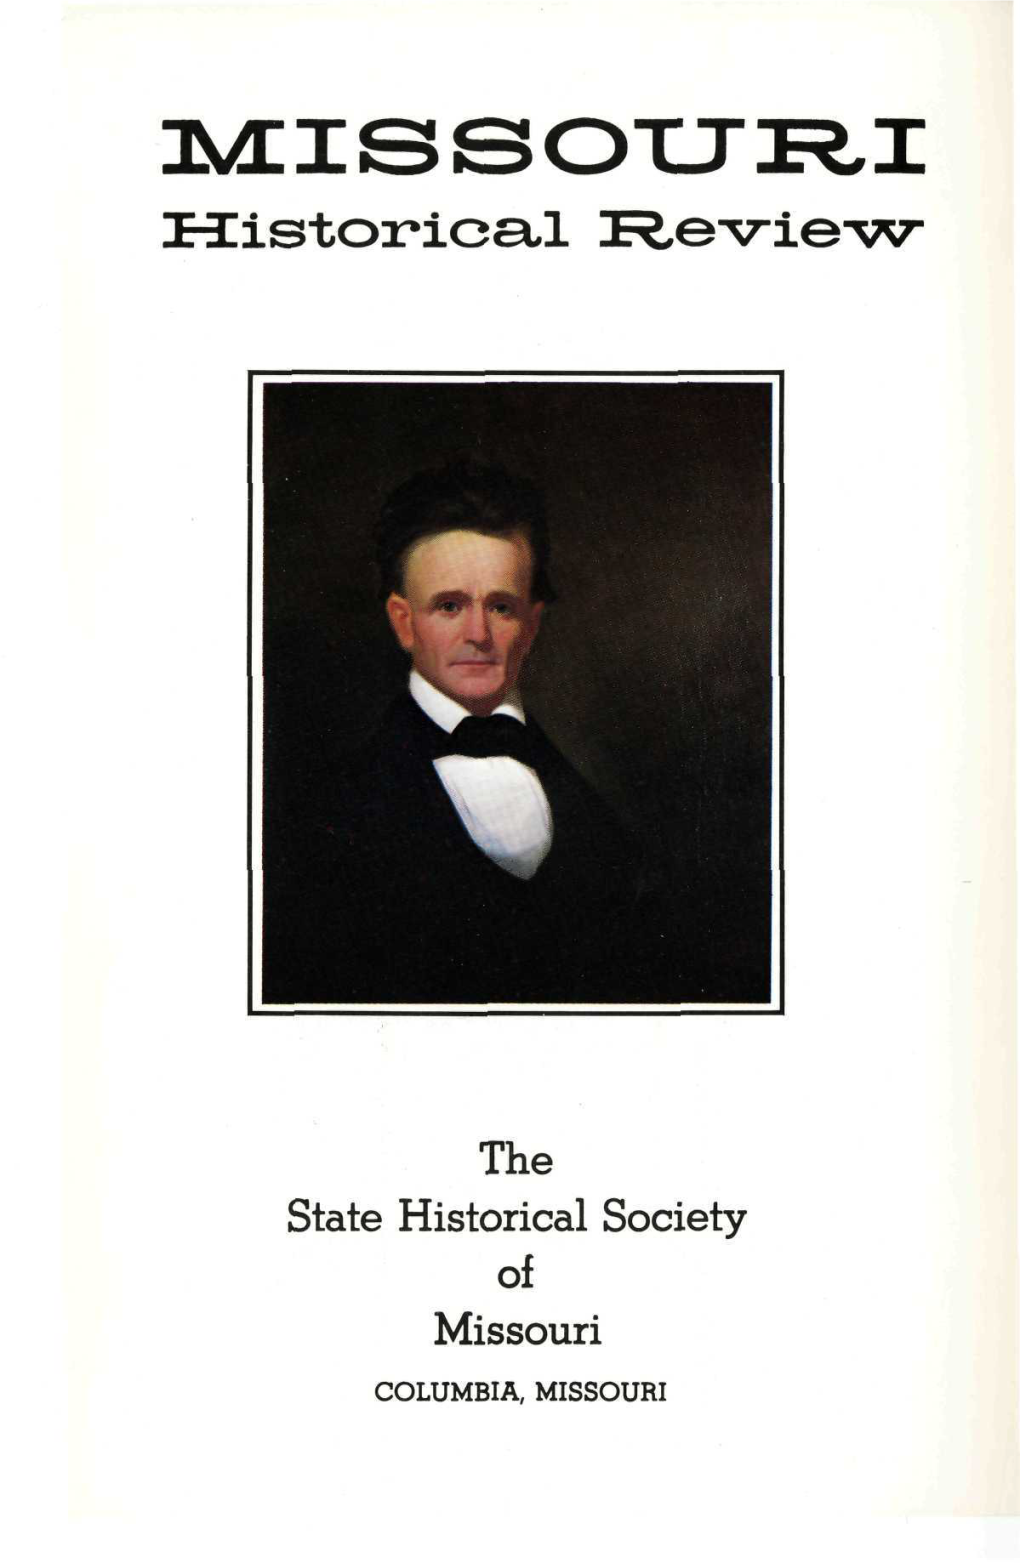 Robert Eaton Acock Recently Was Presented to the State His­ Torical Society of Missouri by the Ralph D